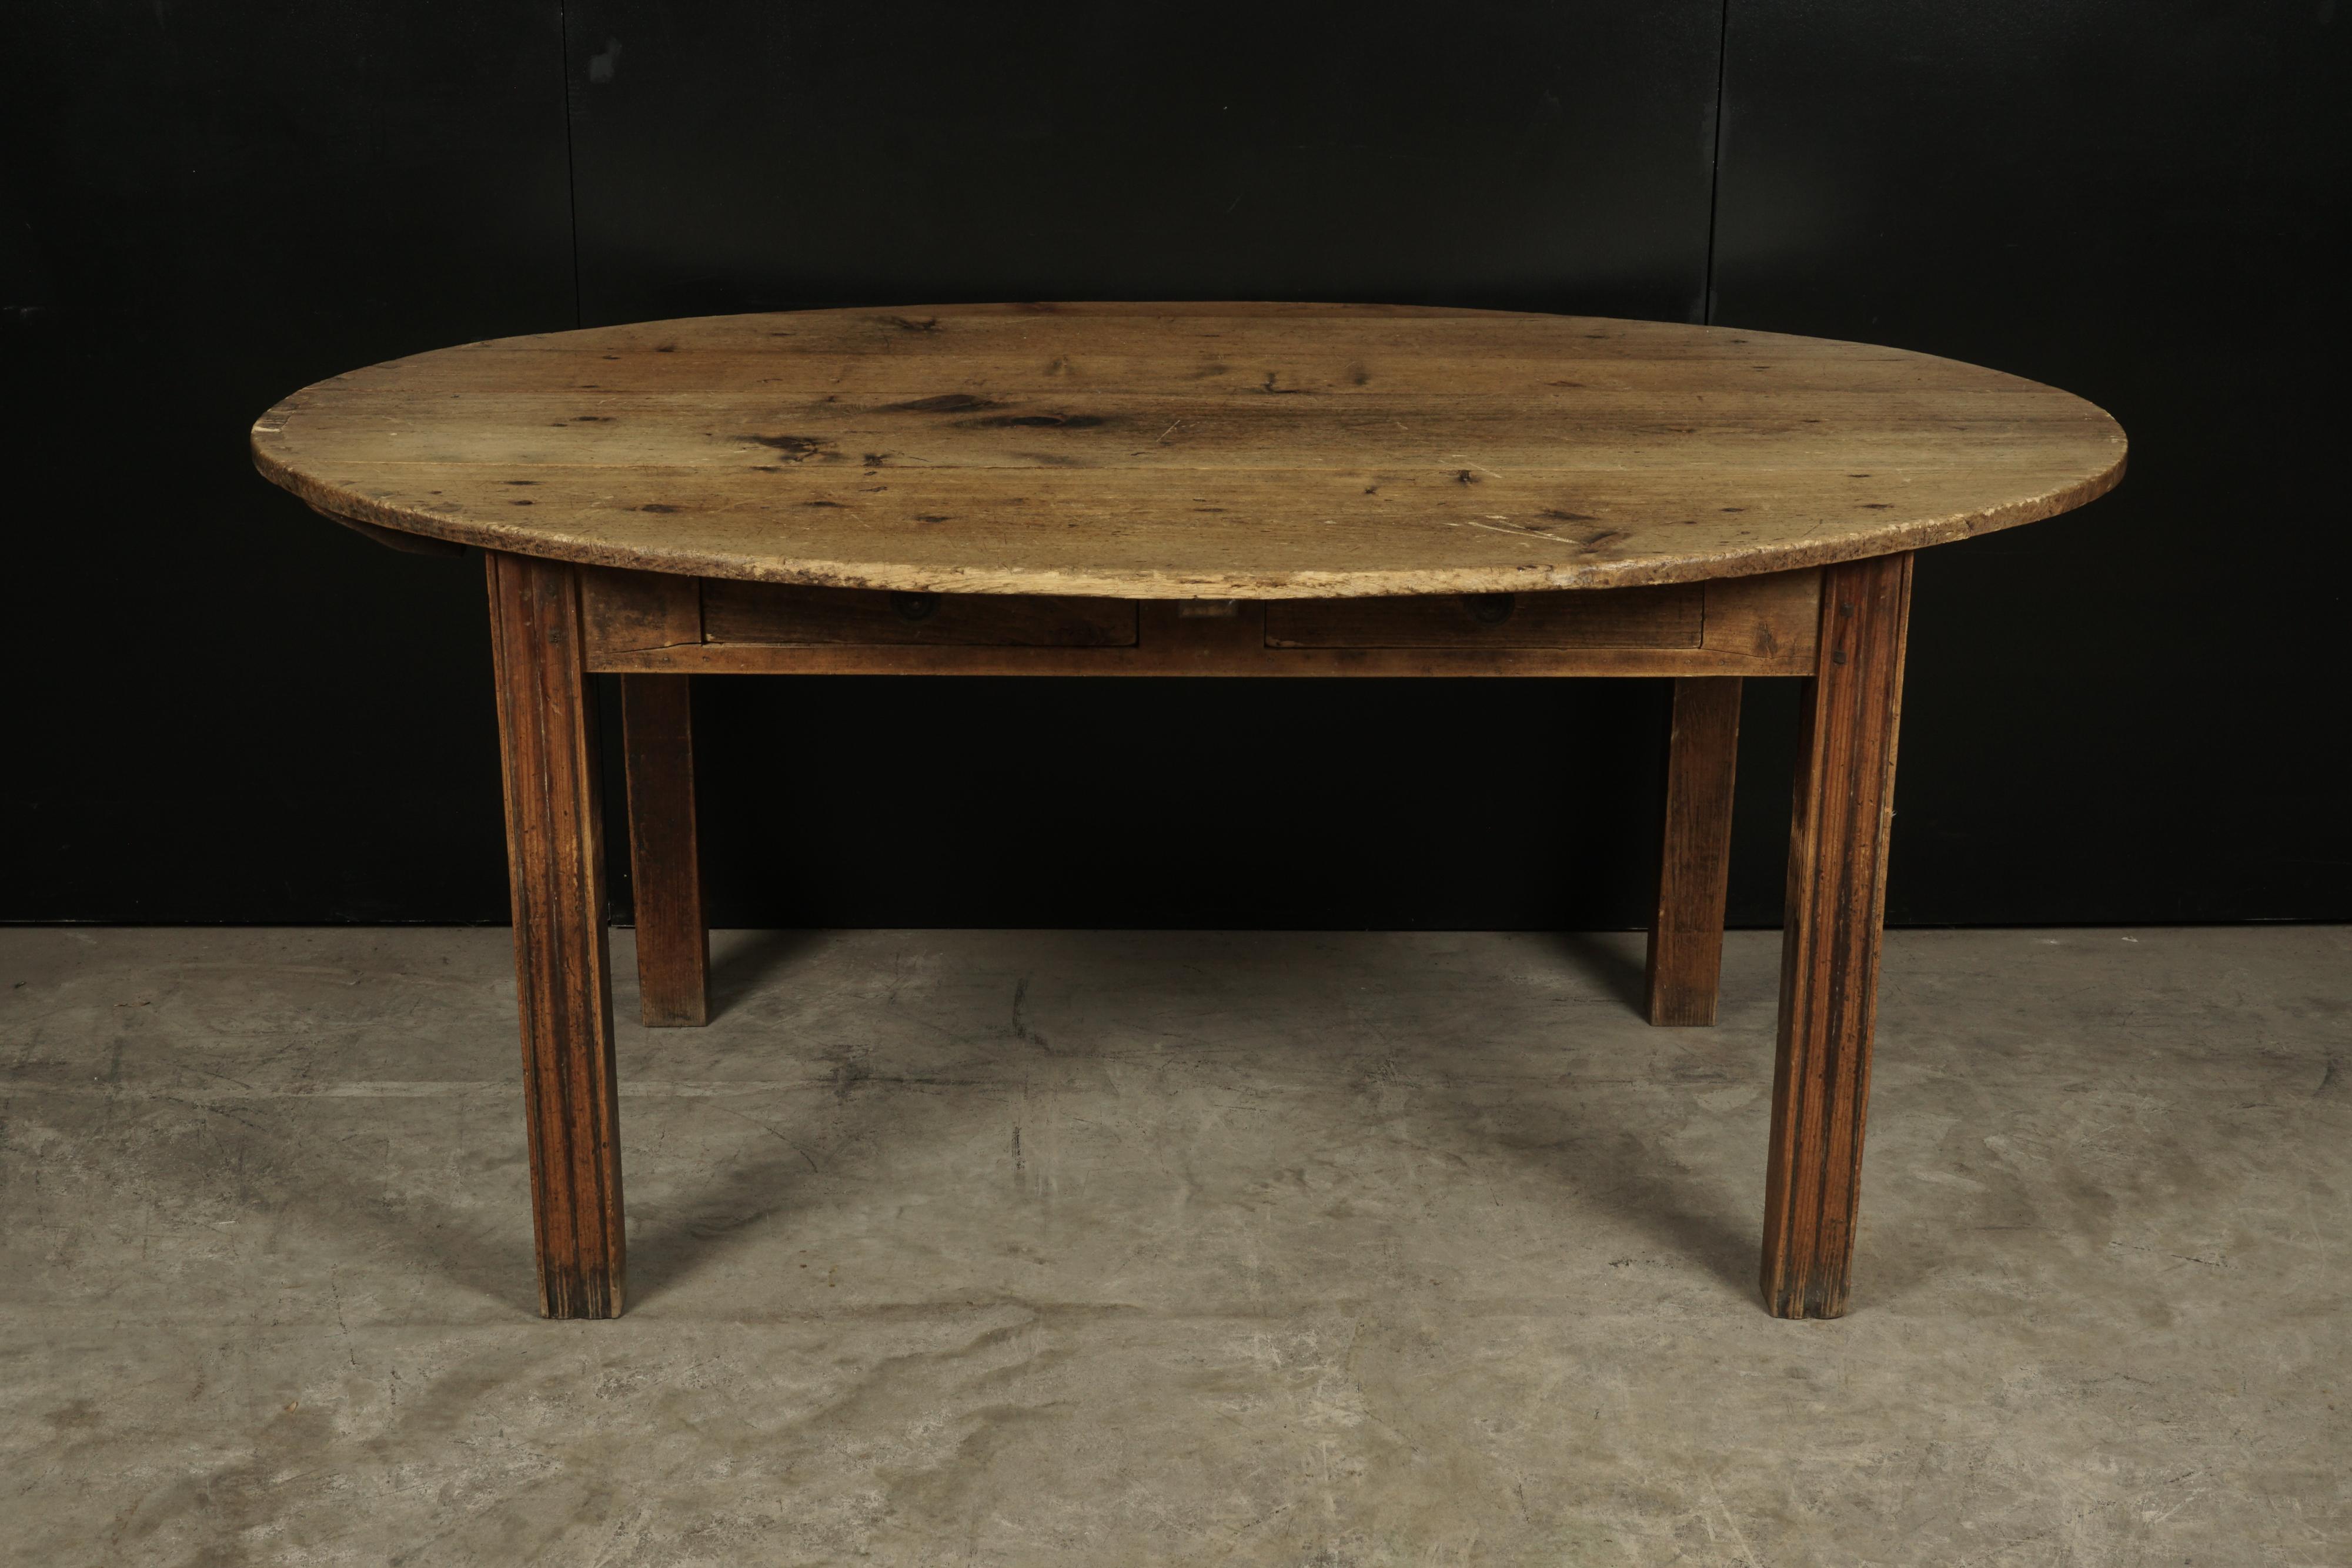 Oval farm table from France, circa 1920. Solid pine construction with two drawers.